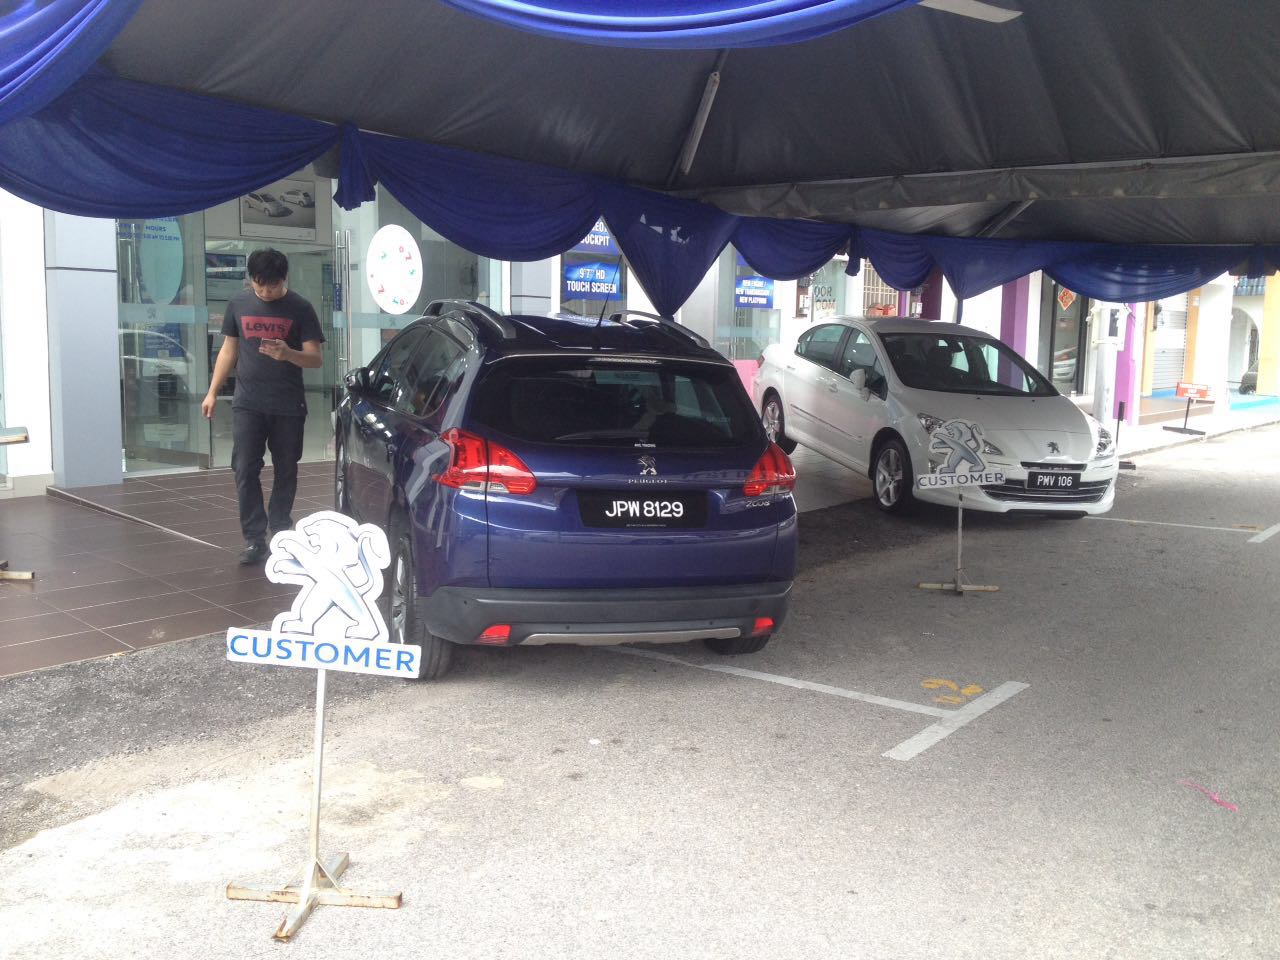 TEST DRIVE EVENT